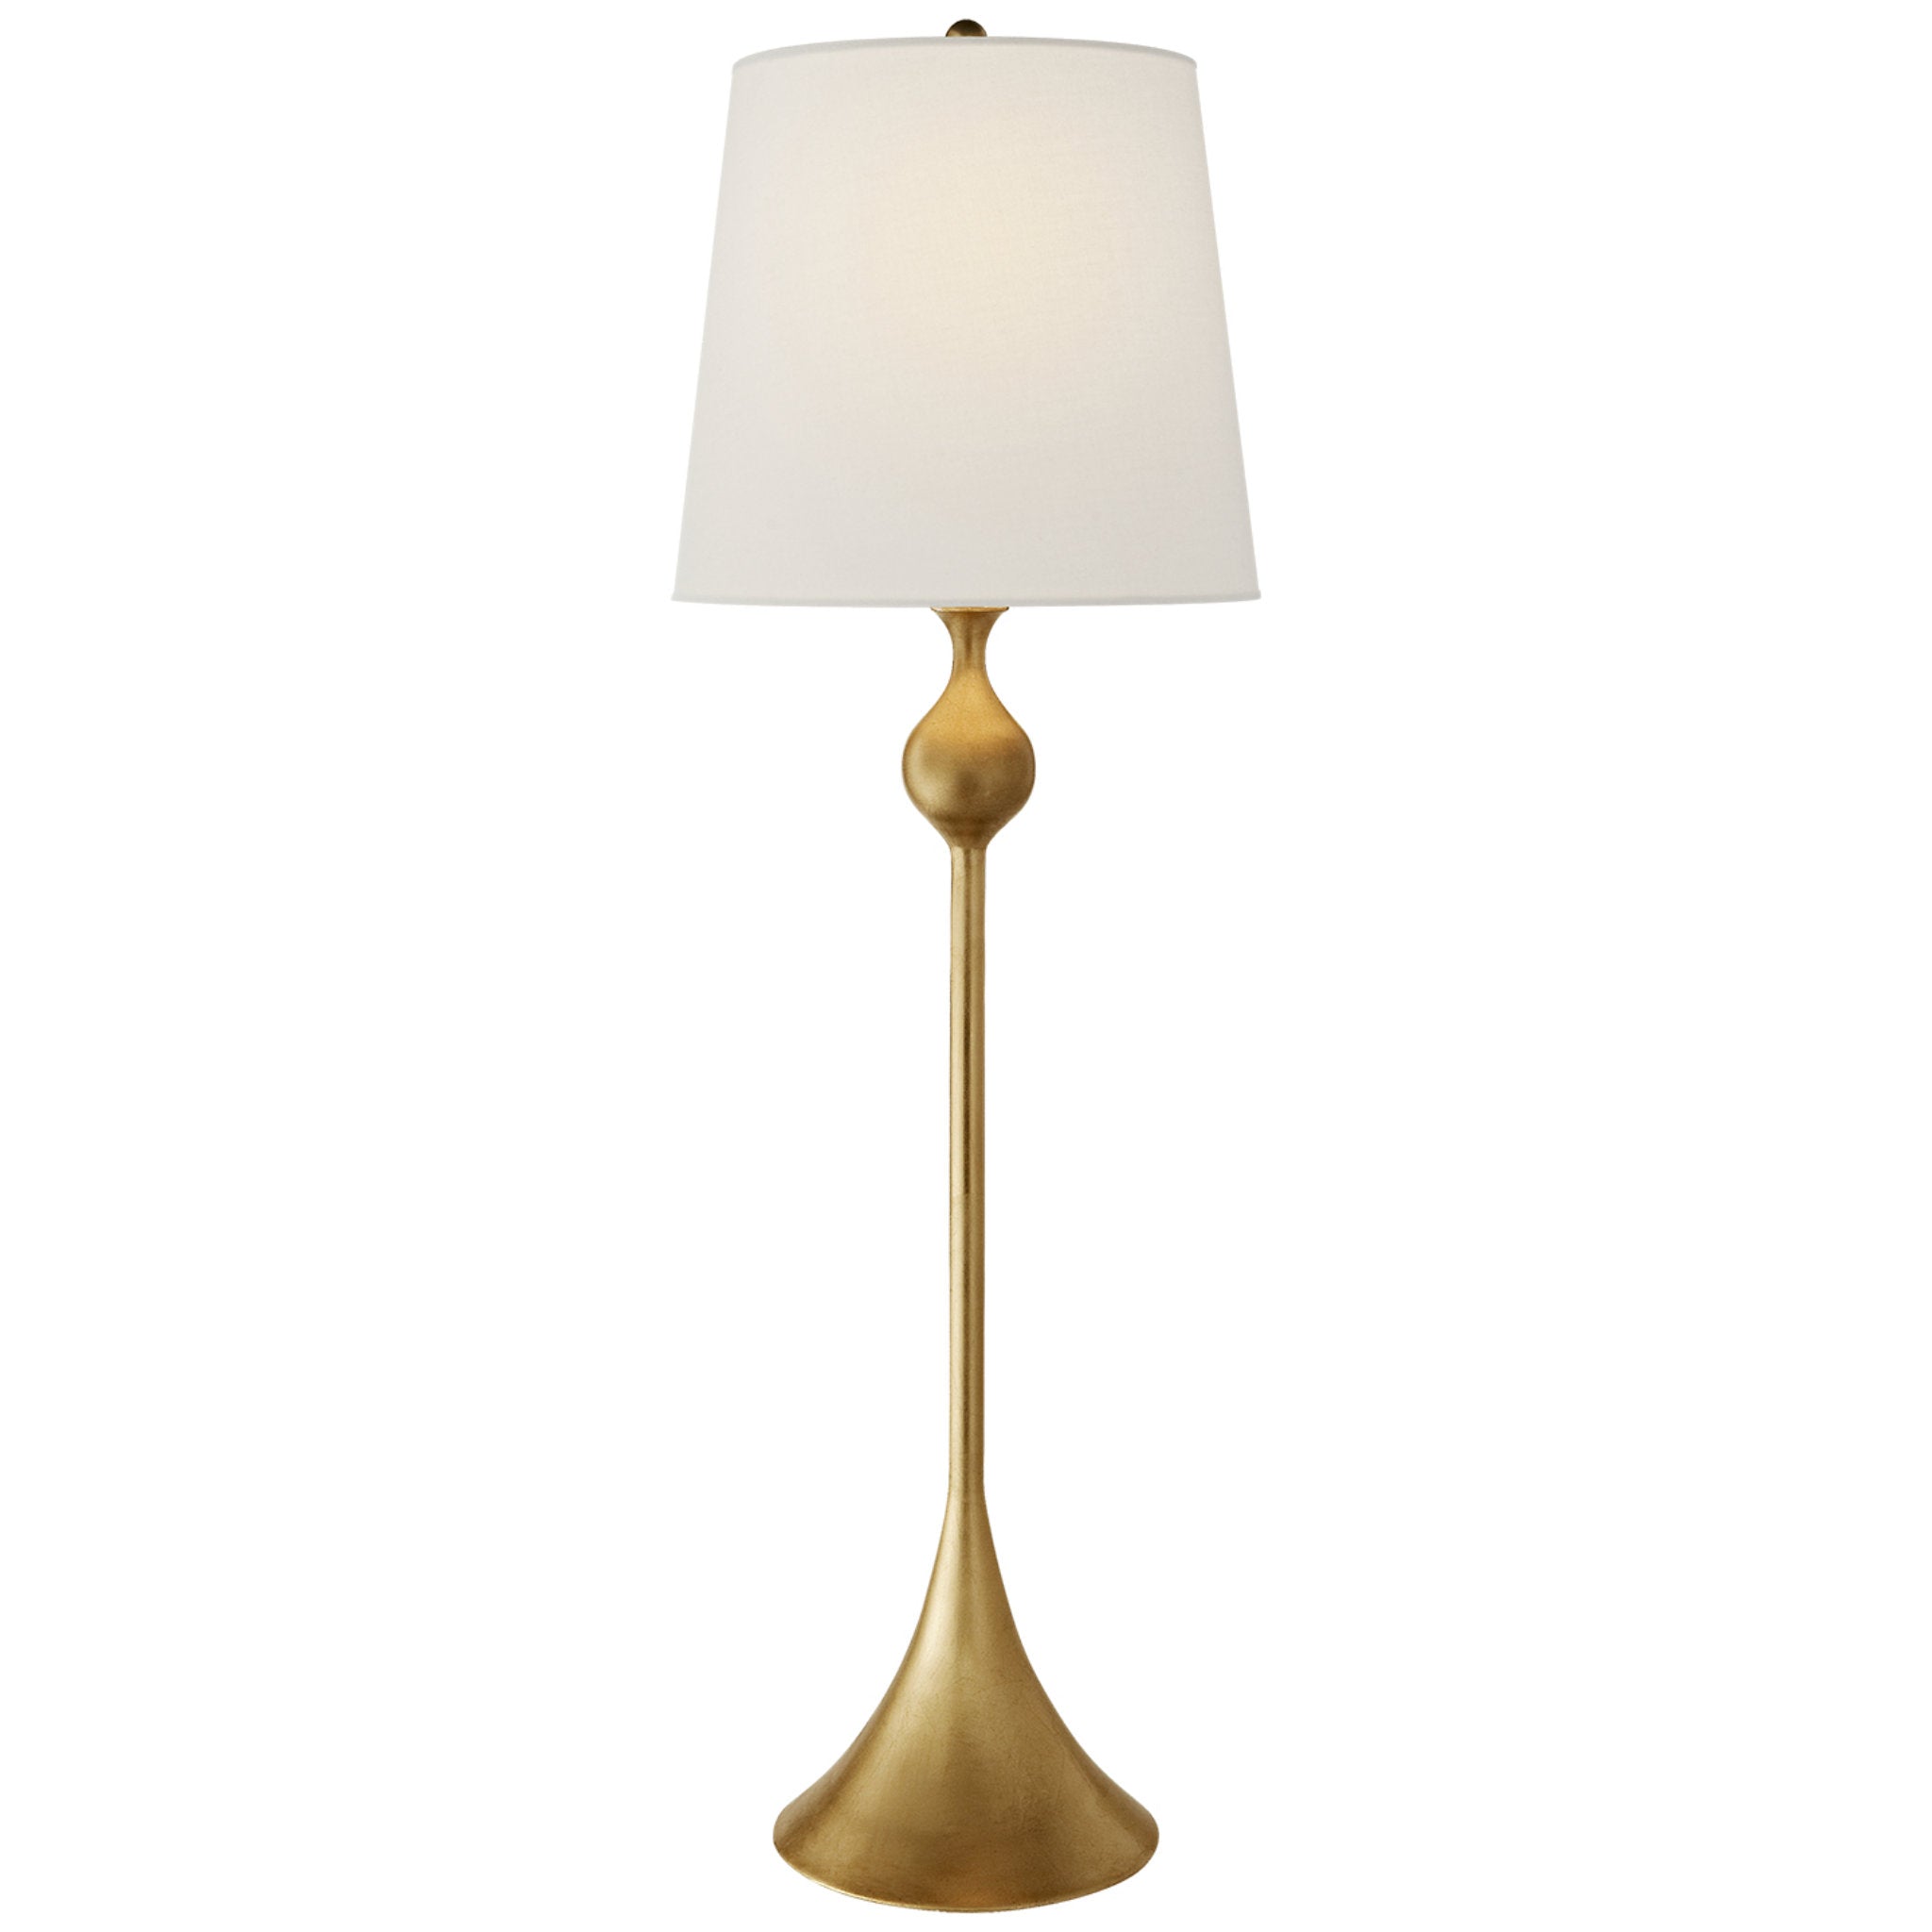 AERIN Dover Buffet Lamp in Gild with Linen Shade